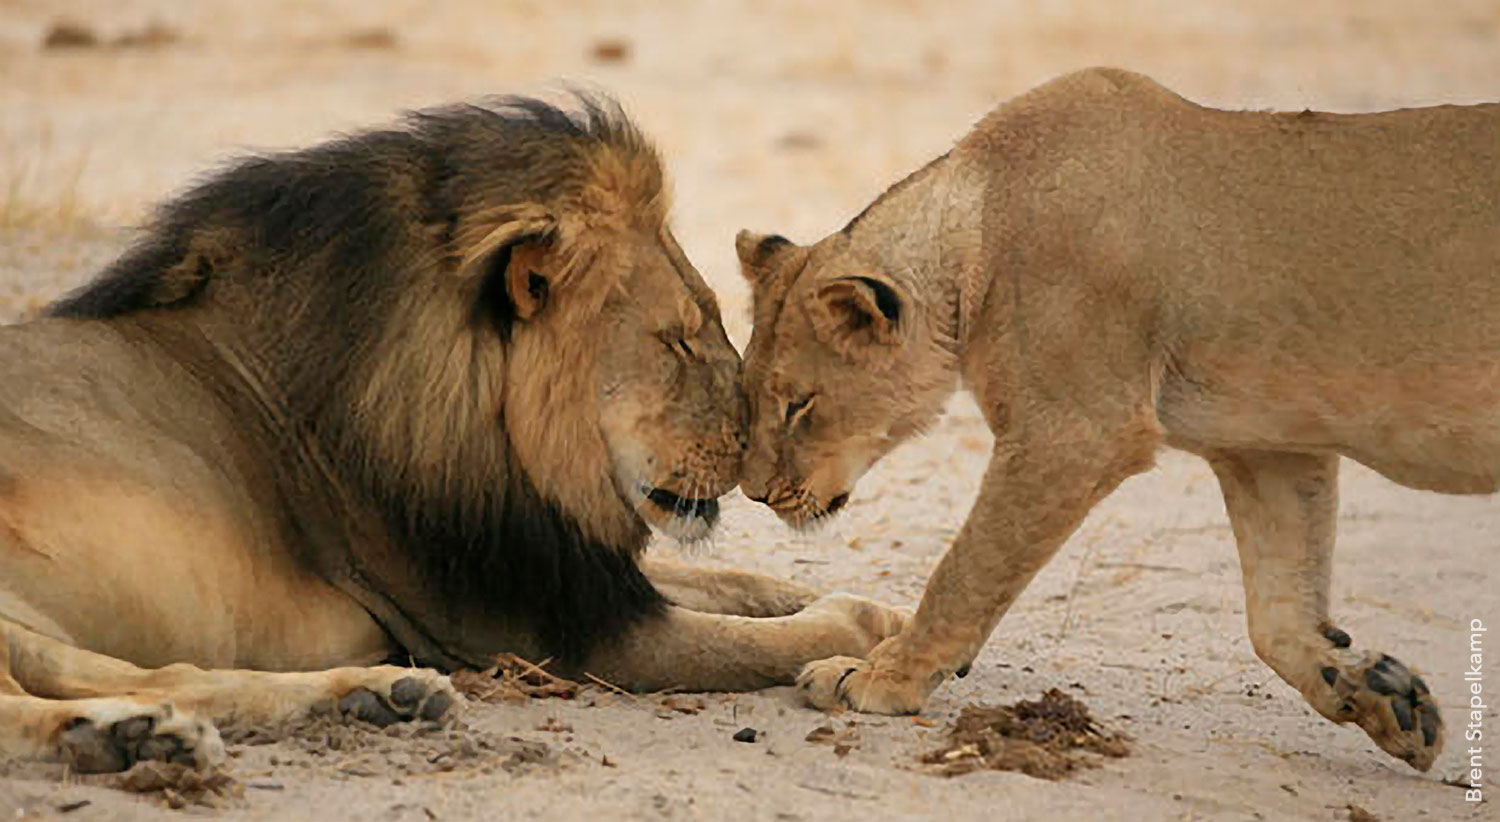 What Cecil the Lion's Death Teaches Us About Empathy